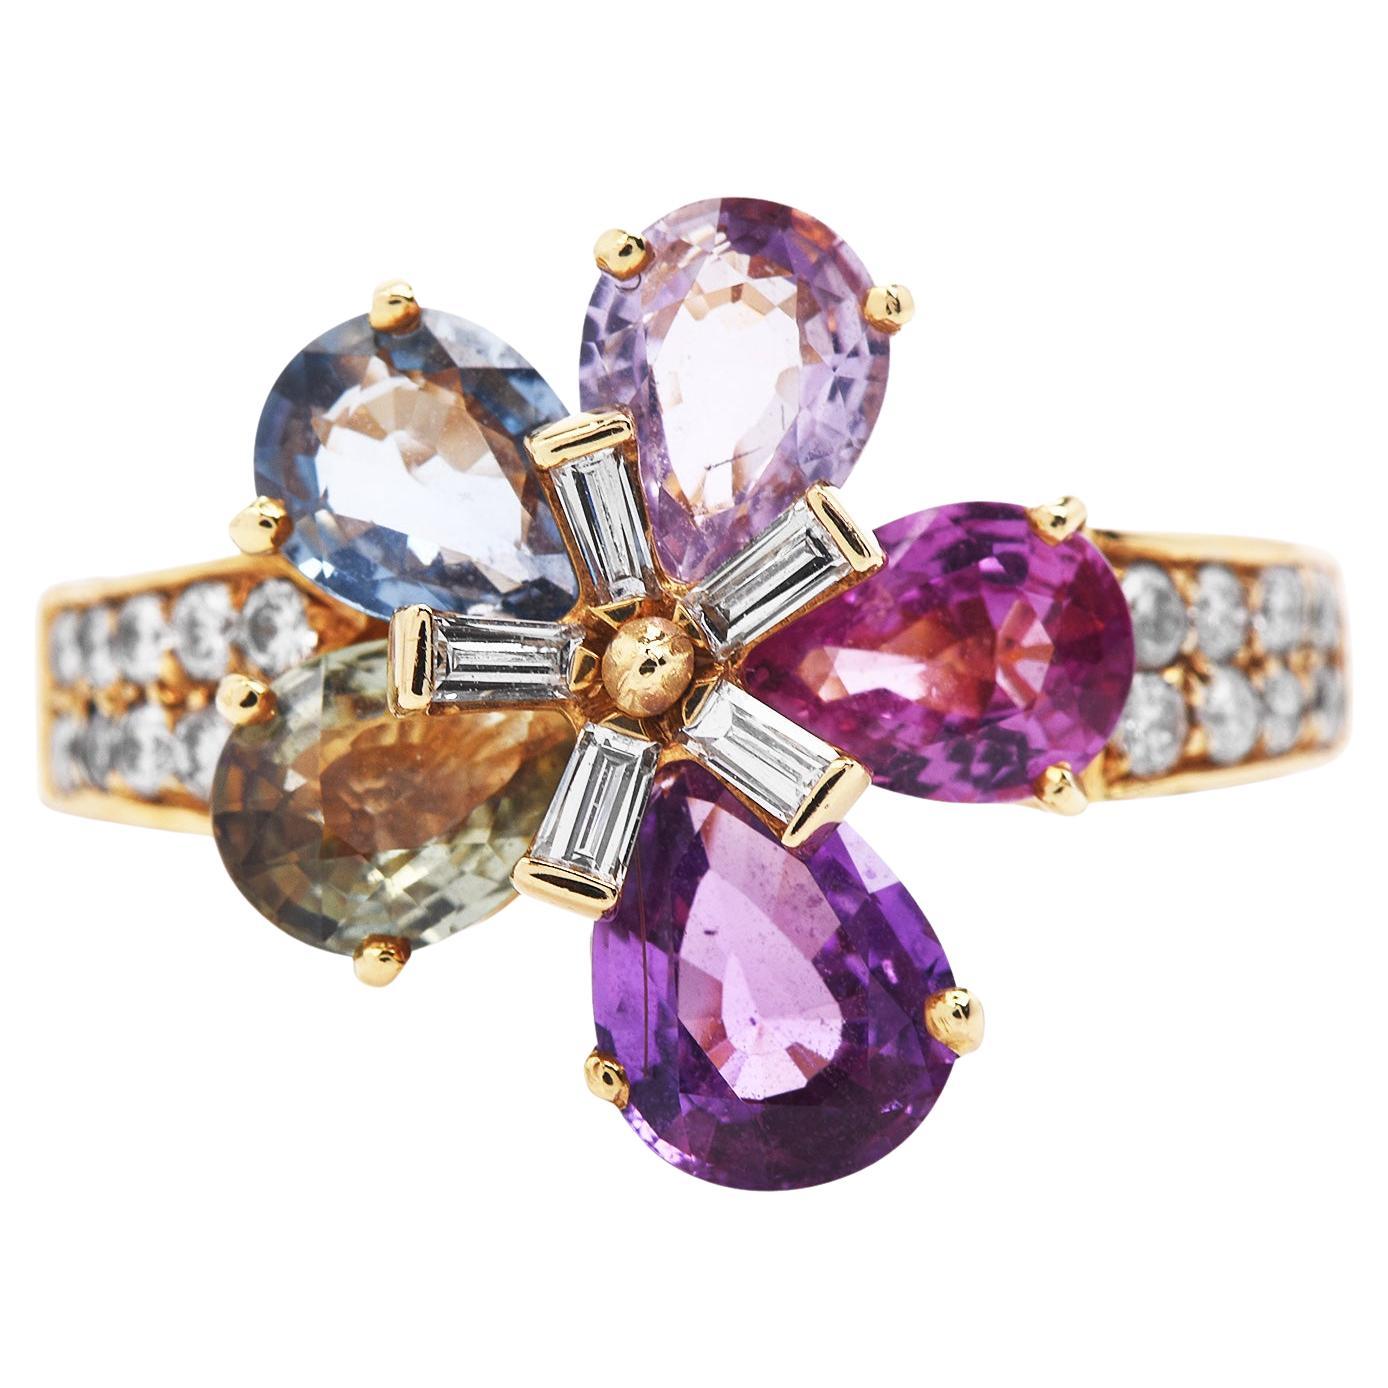 These chic designer Bvlgari multi-color sapphire and diamond ring is crafted in solid 18-karat yellow gold, weighing 7.5 grams and measuring 16mm x 7mm high. They are composed of 5 natural, pear-shaped brilliant-cut sapphires, simulating flower